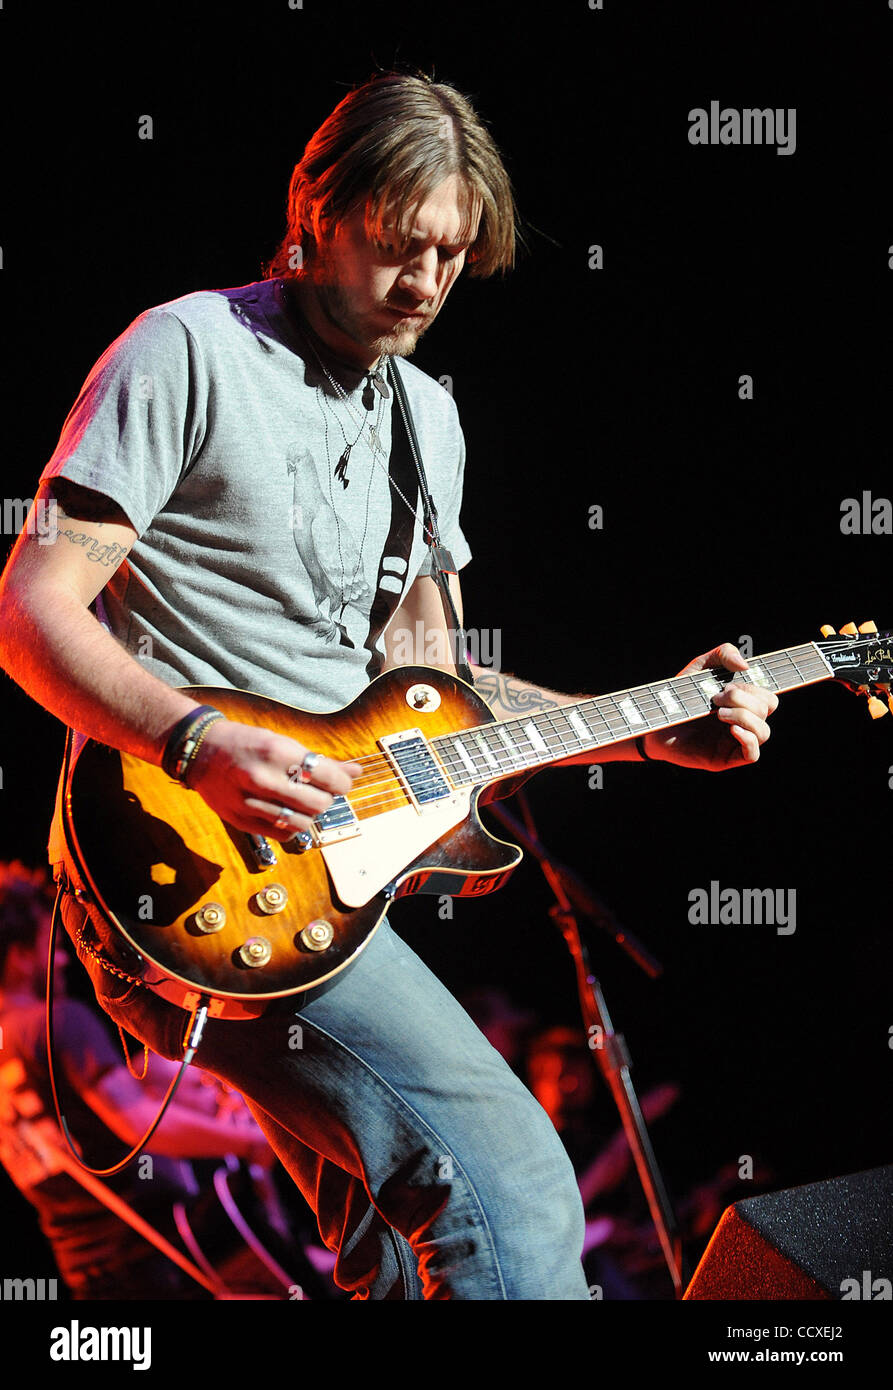 Mar 21, 2010 - Hampton, Virginia; USA - Guitarist BRIAN BANDAS of the band Love and Theft performs live as part of the 2010 Winterblast that was presented by 97.3 The Eagle Radio Station at the Hampton Coliseum. Copyright 2010 Jason Moore. Stock Photo